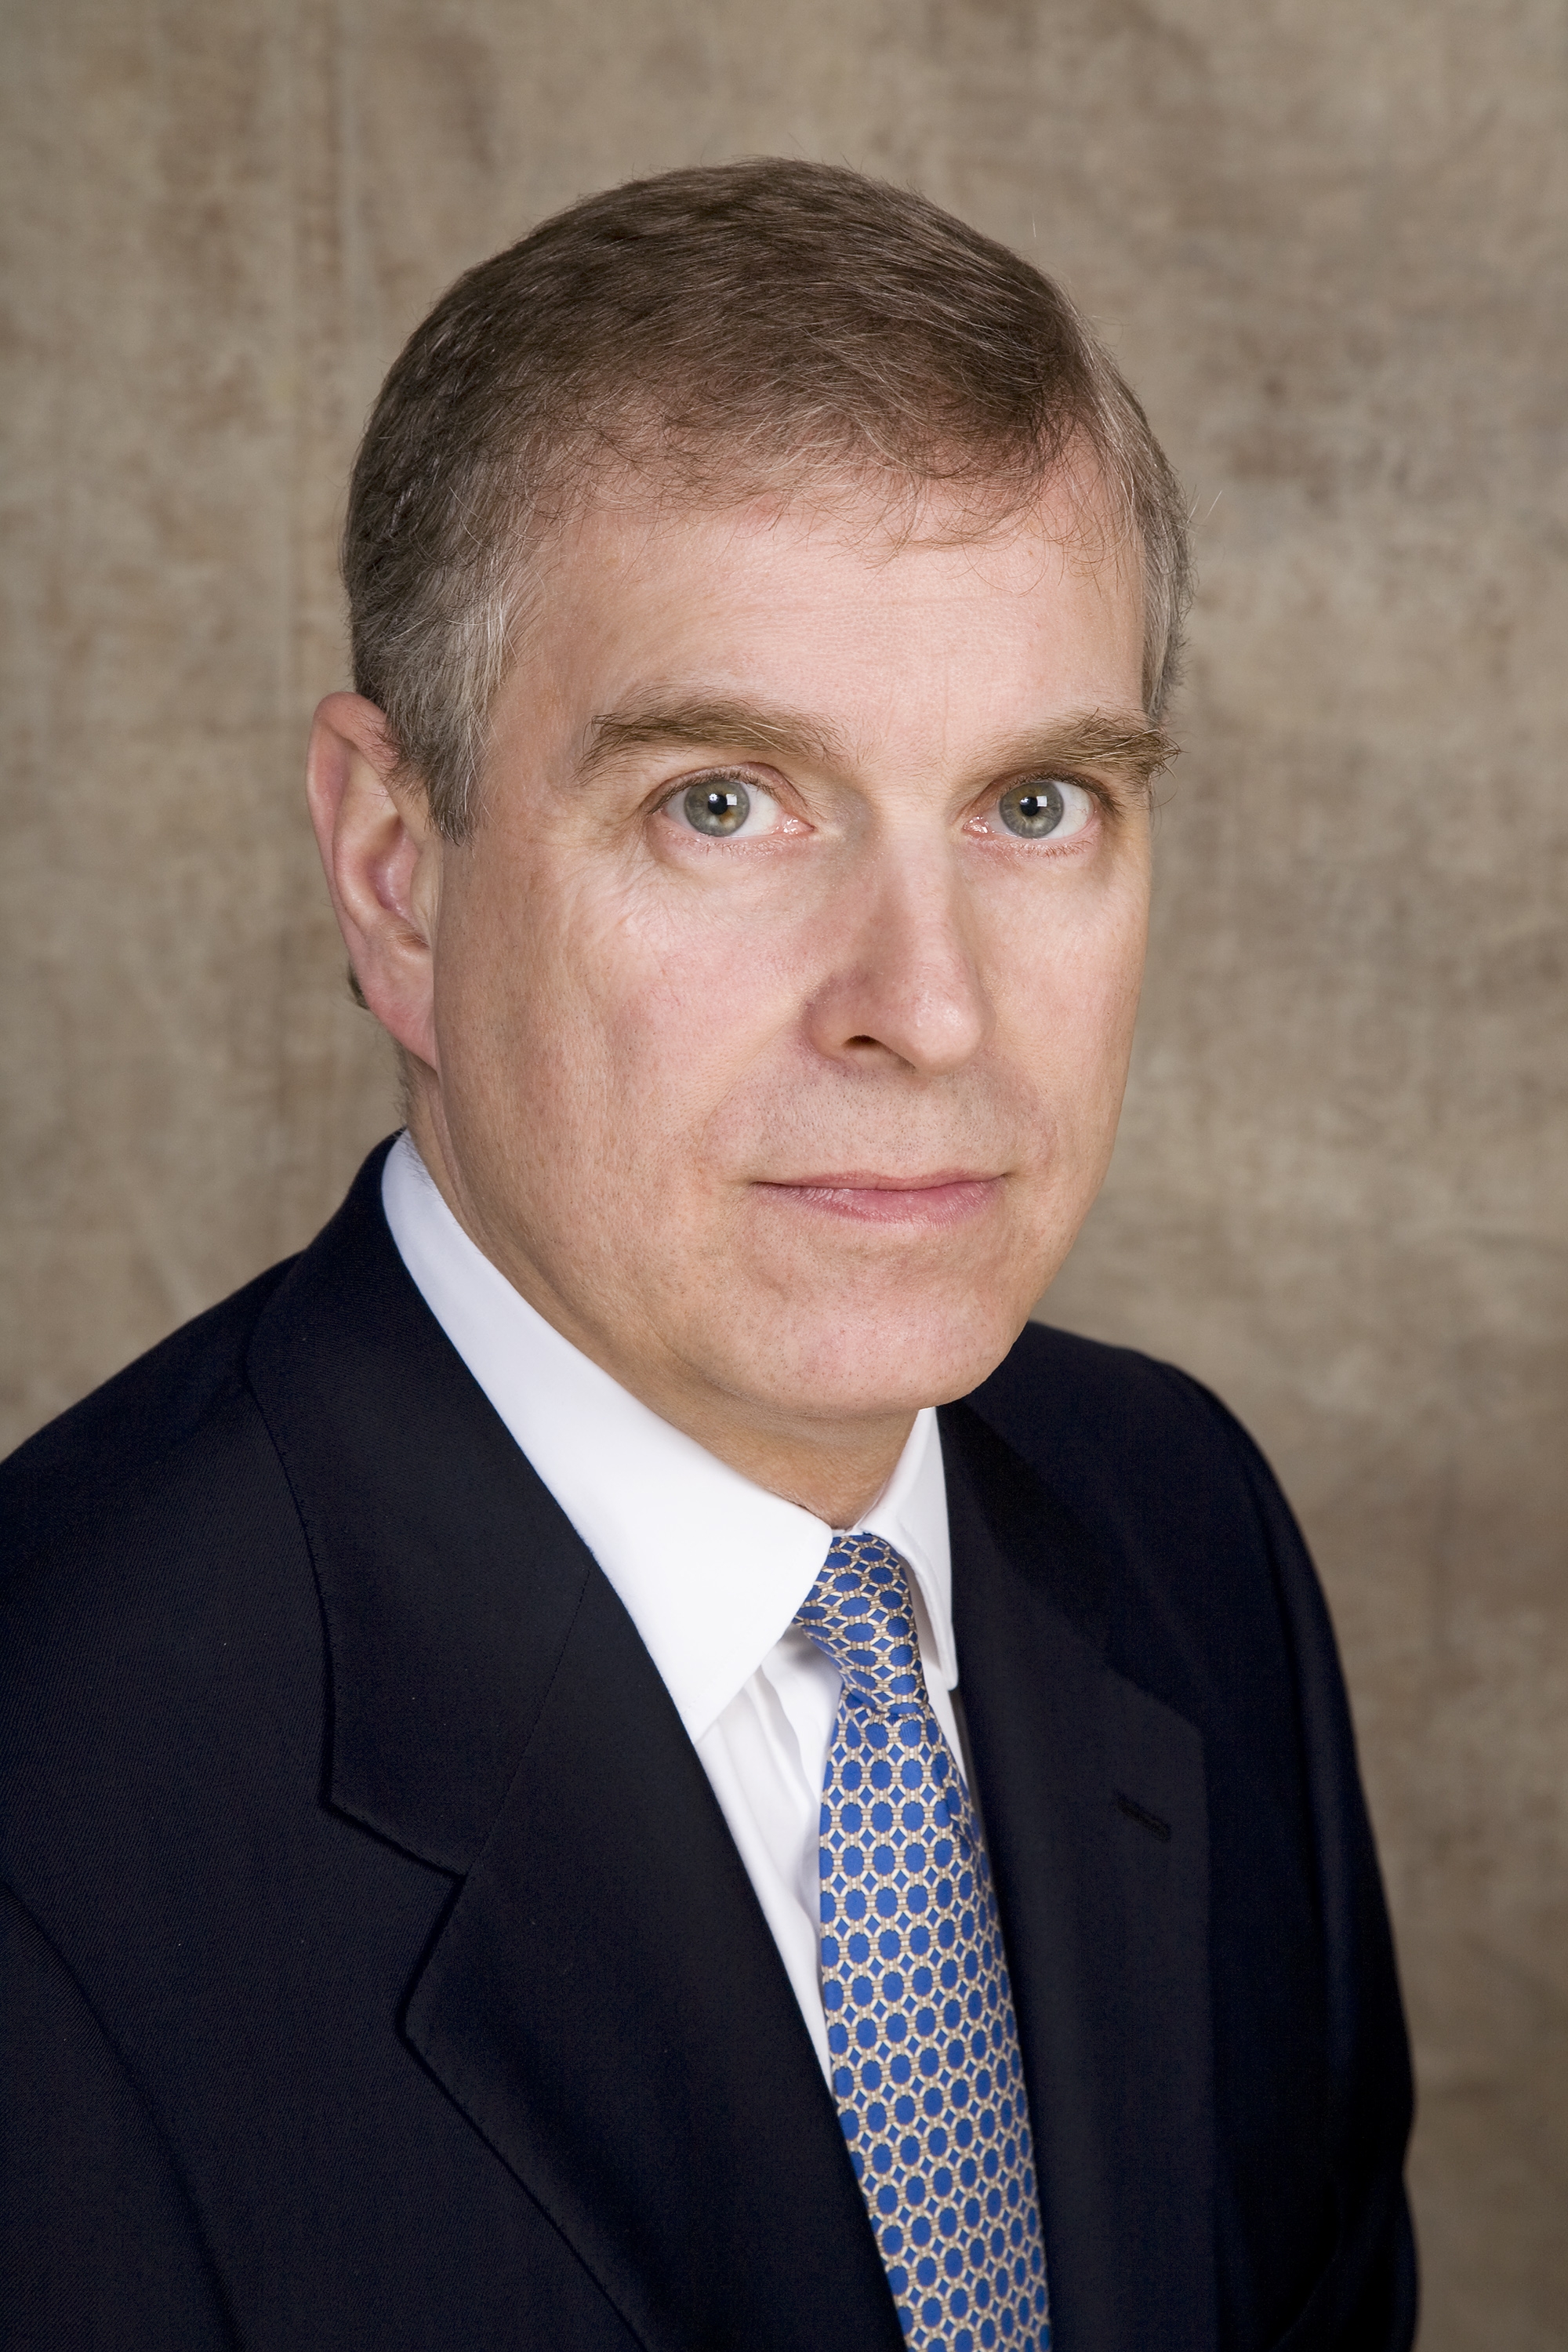 HRH The Duke of York, KG will be the guest of honour at The Printing Charity's 186th Annual Luncheon